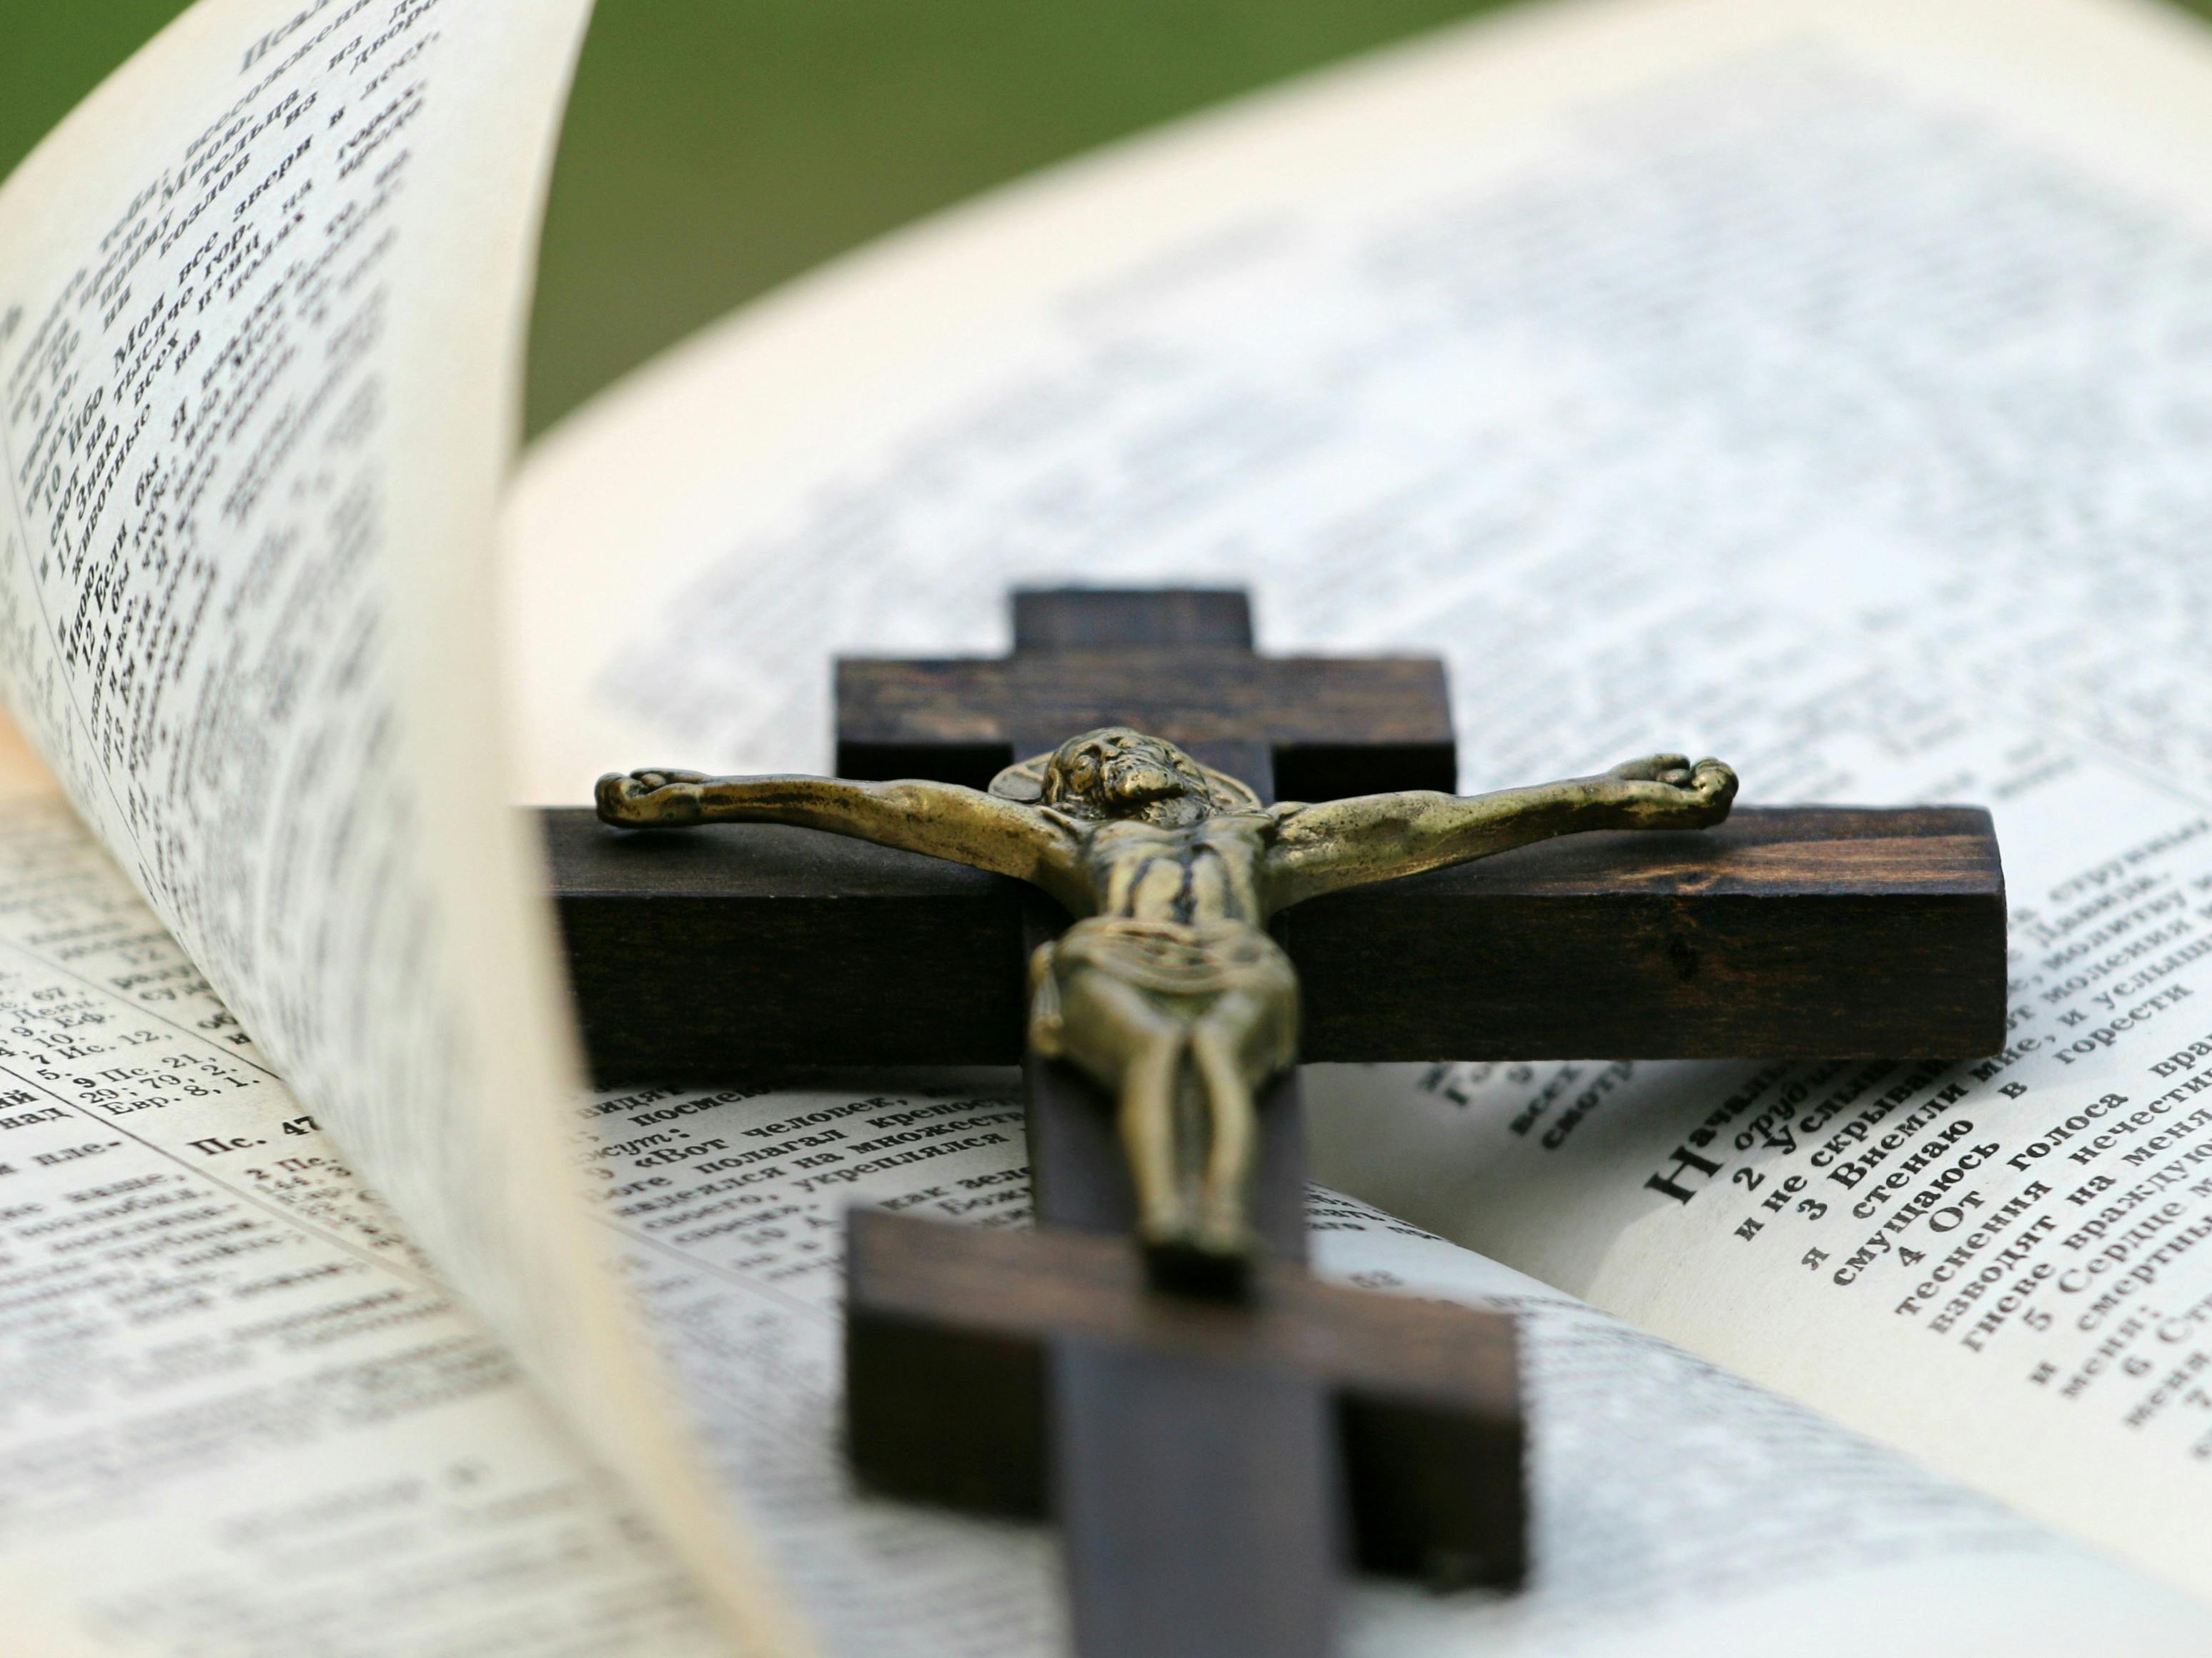 Crucifix on top of the Bible. | Photo: Pexels